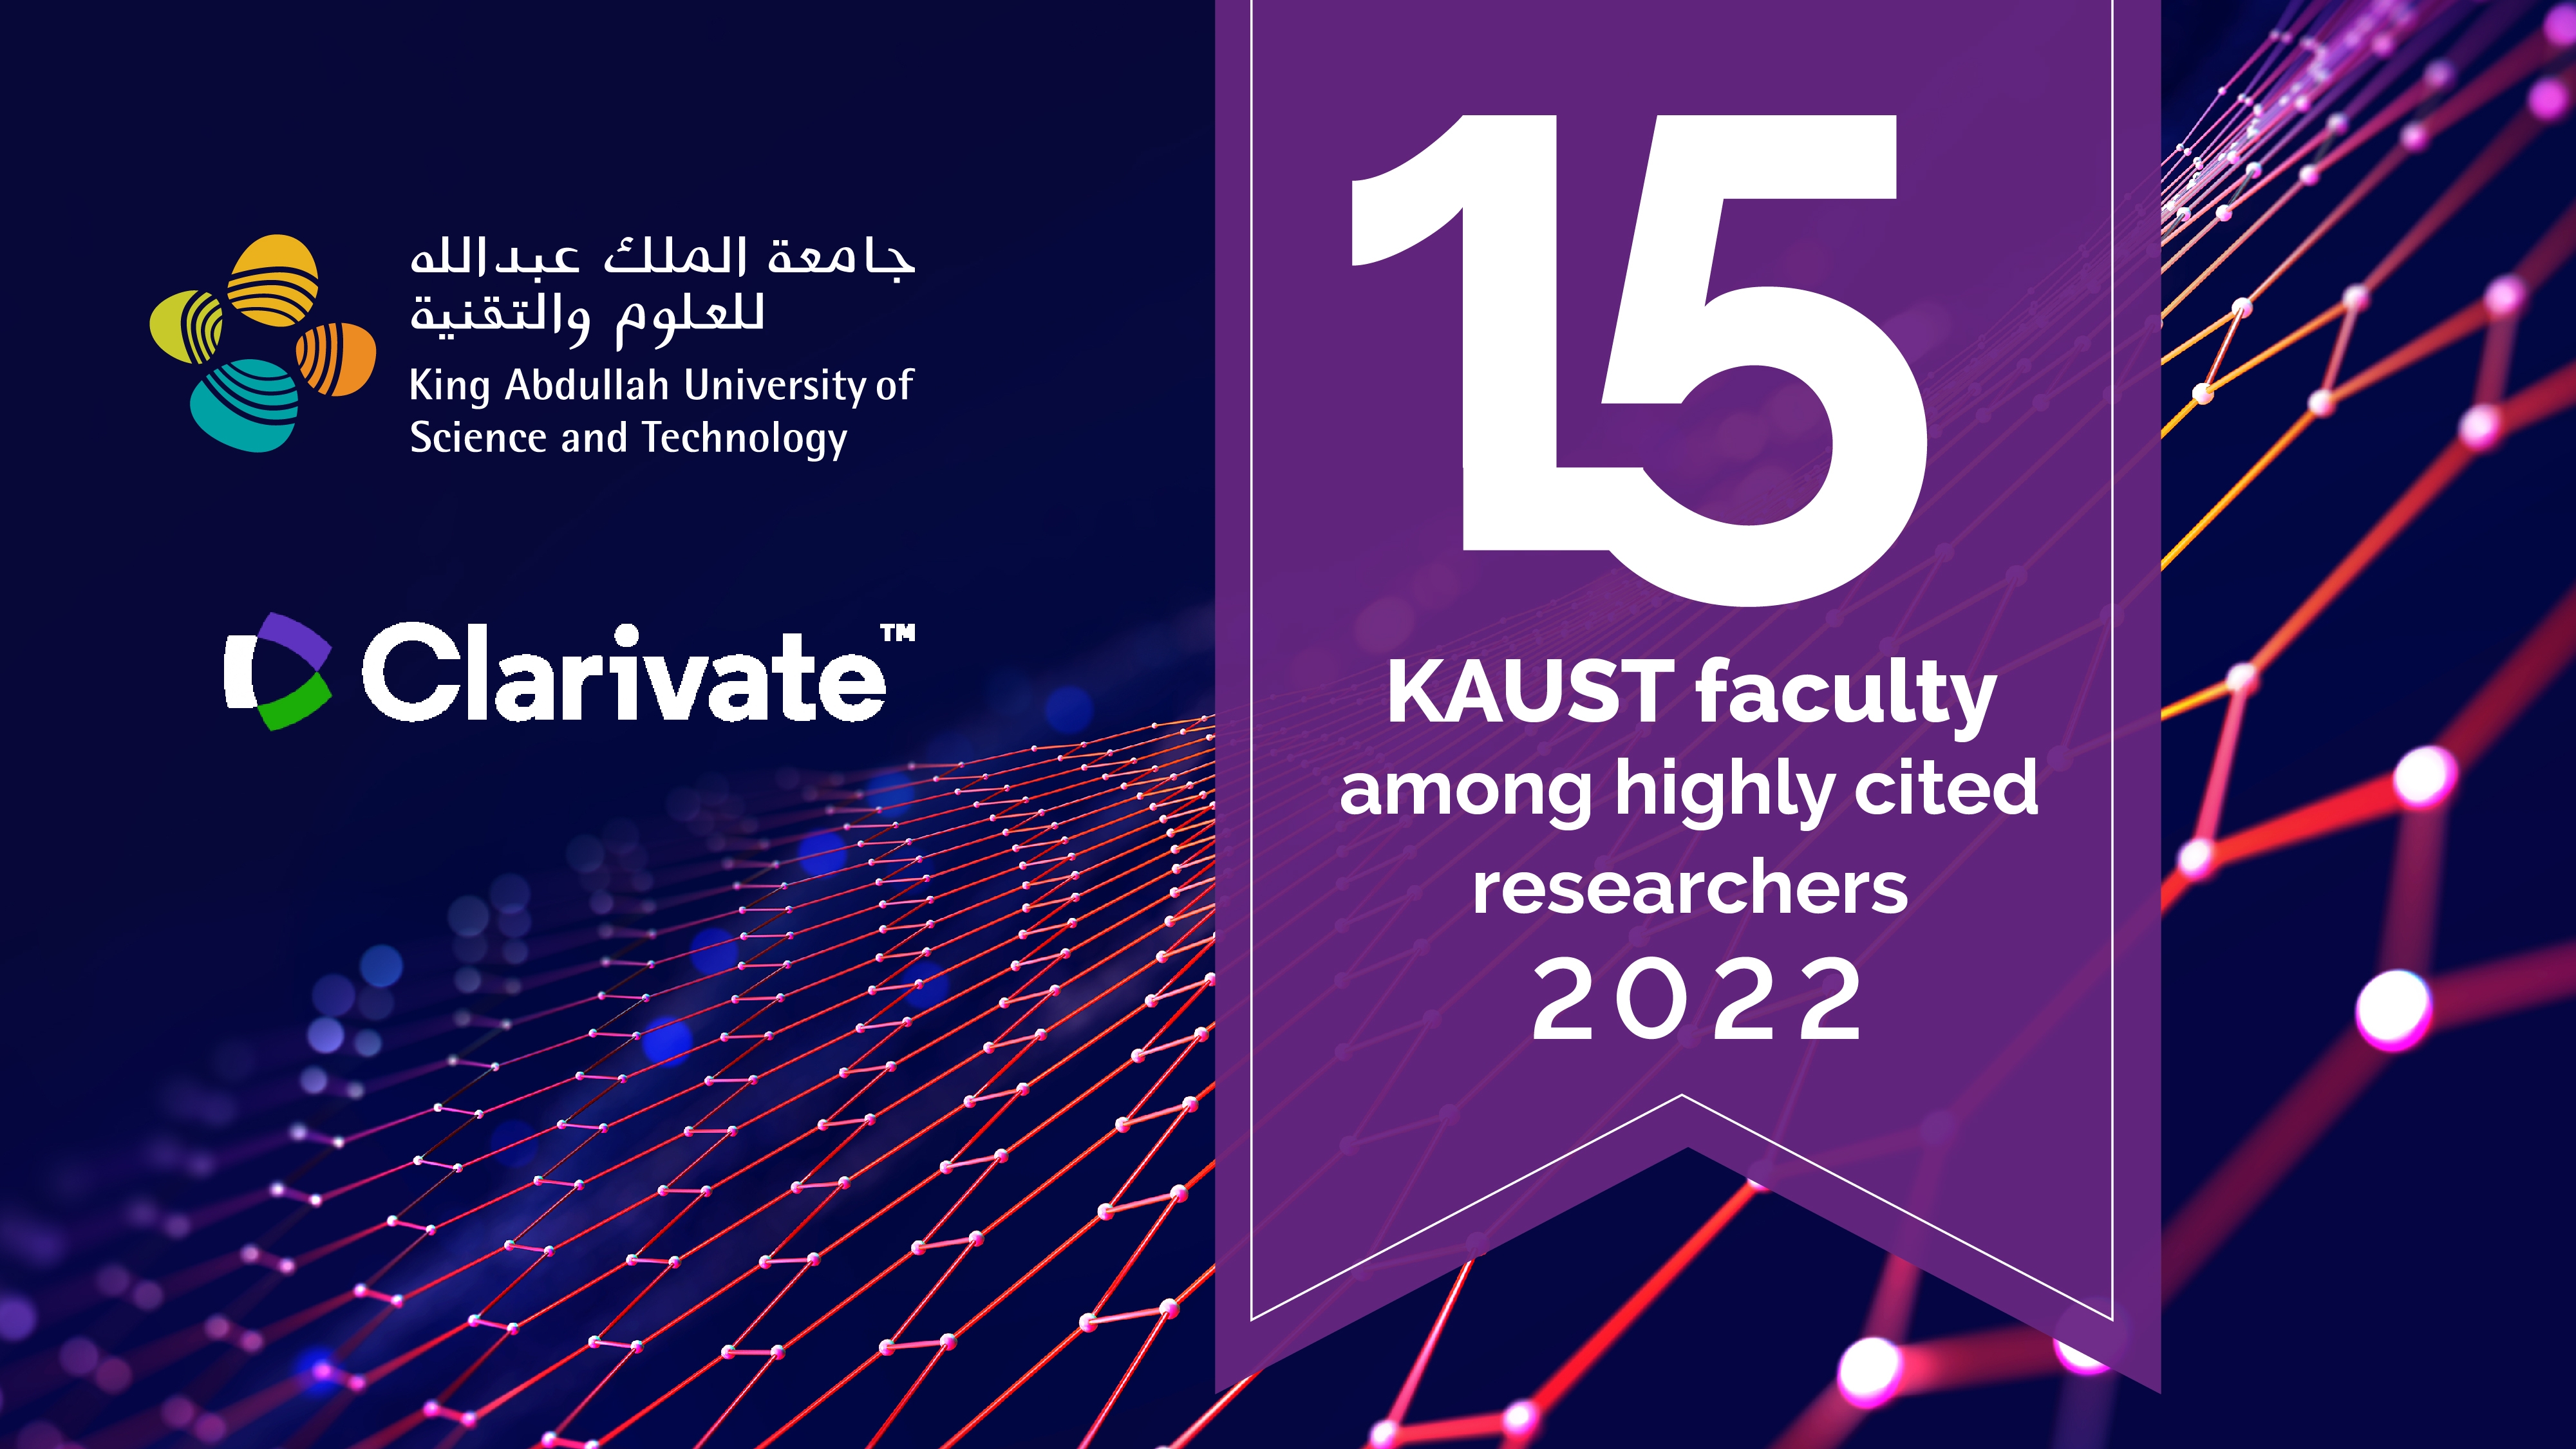 KAUST faculty among highly cited researchers, 2022